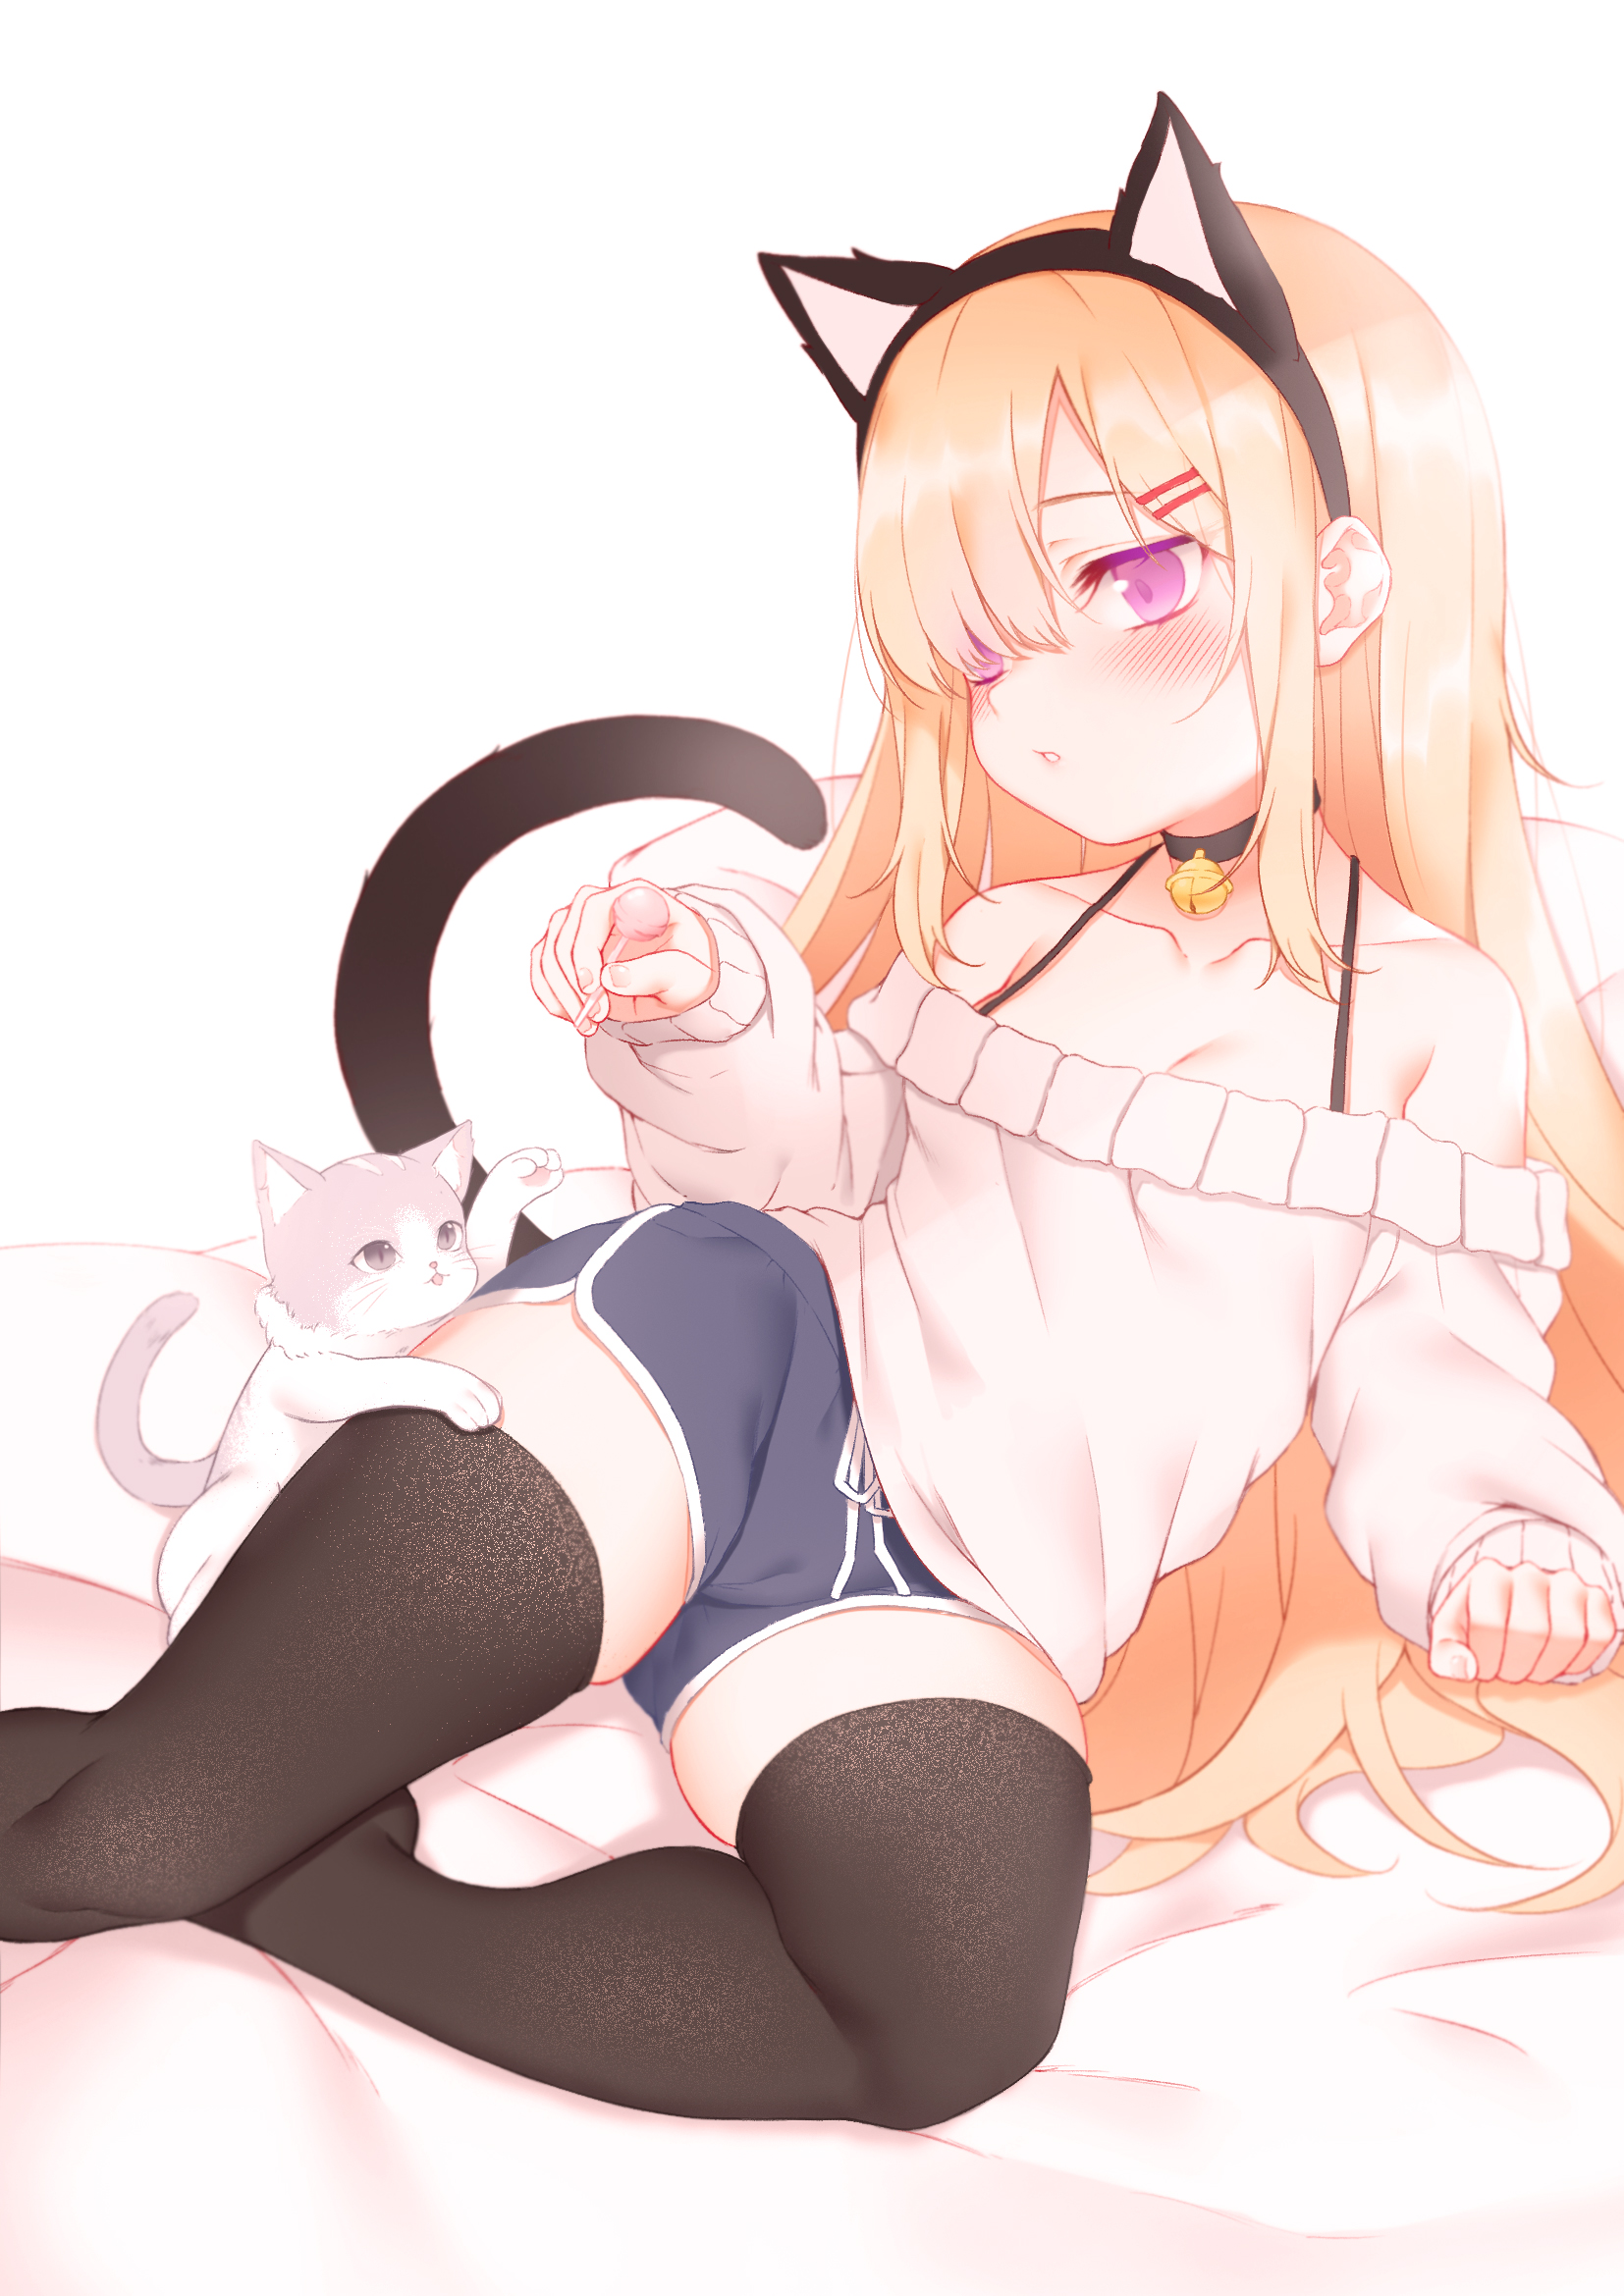 Anime 1654x2339 anime anime girls digital art artwork 2D portrait display cameltoe white background cat ears Zhaofeng Yinyue original characters cats cat tail thigh-highs short shorts sweater blonde long hair purple eyes